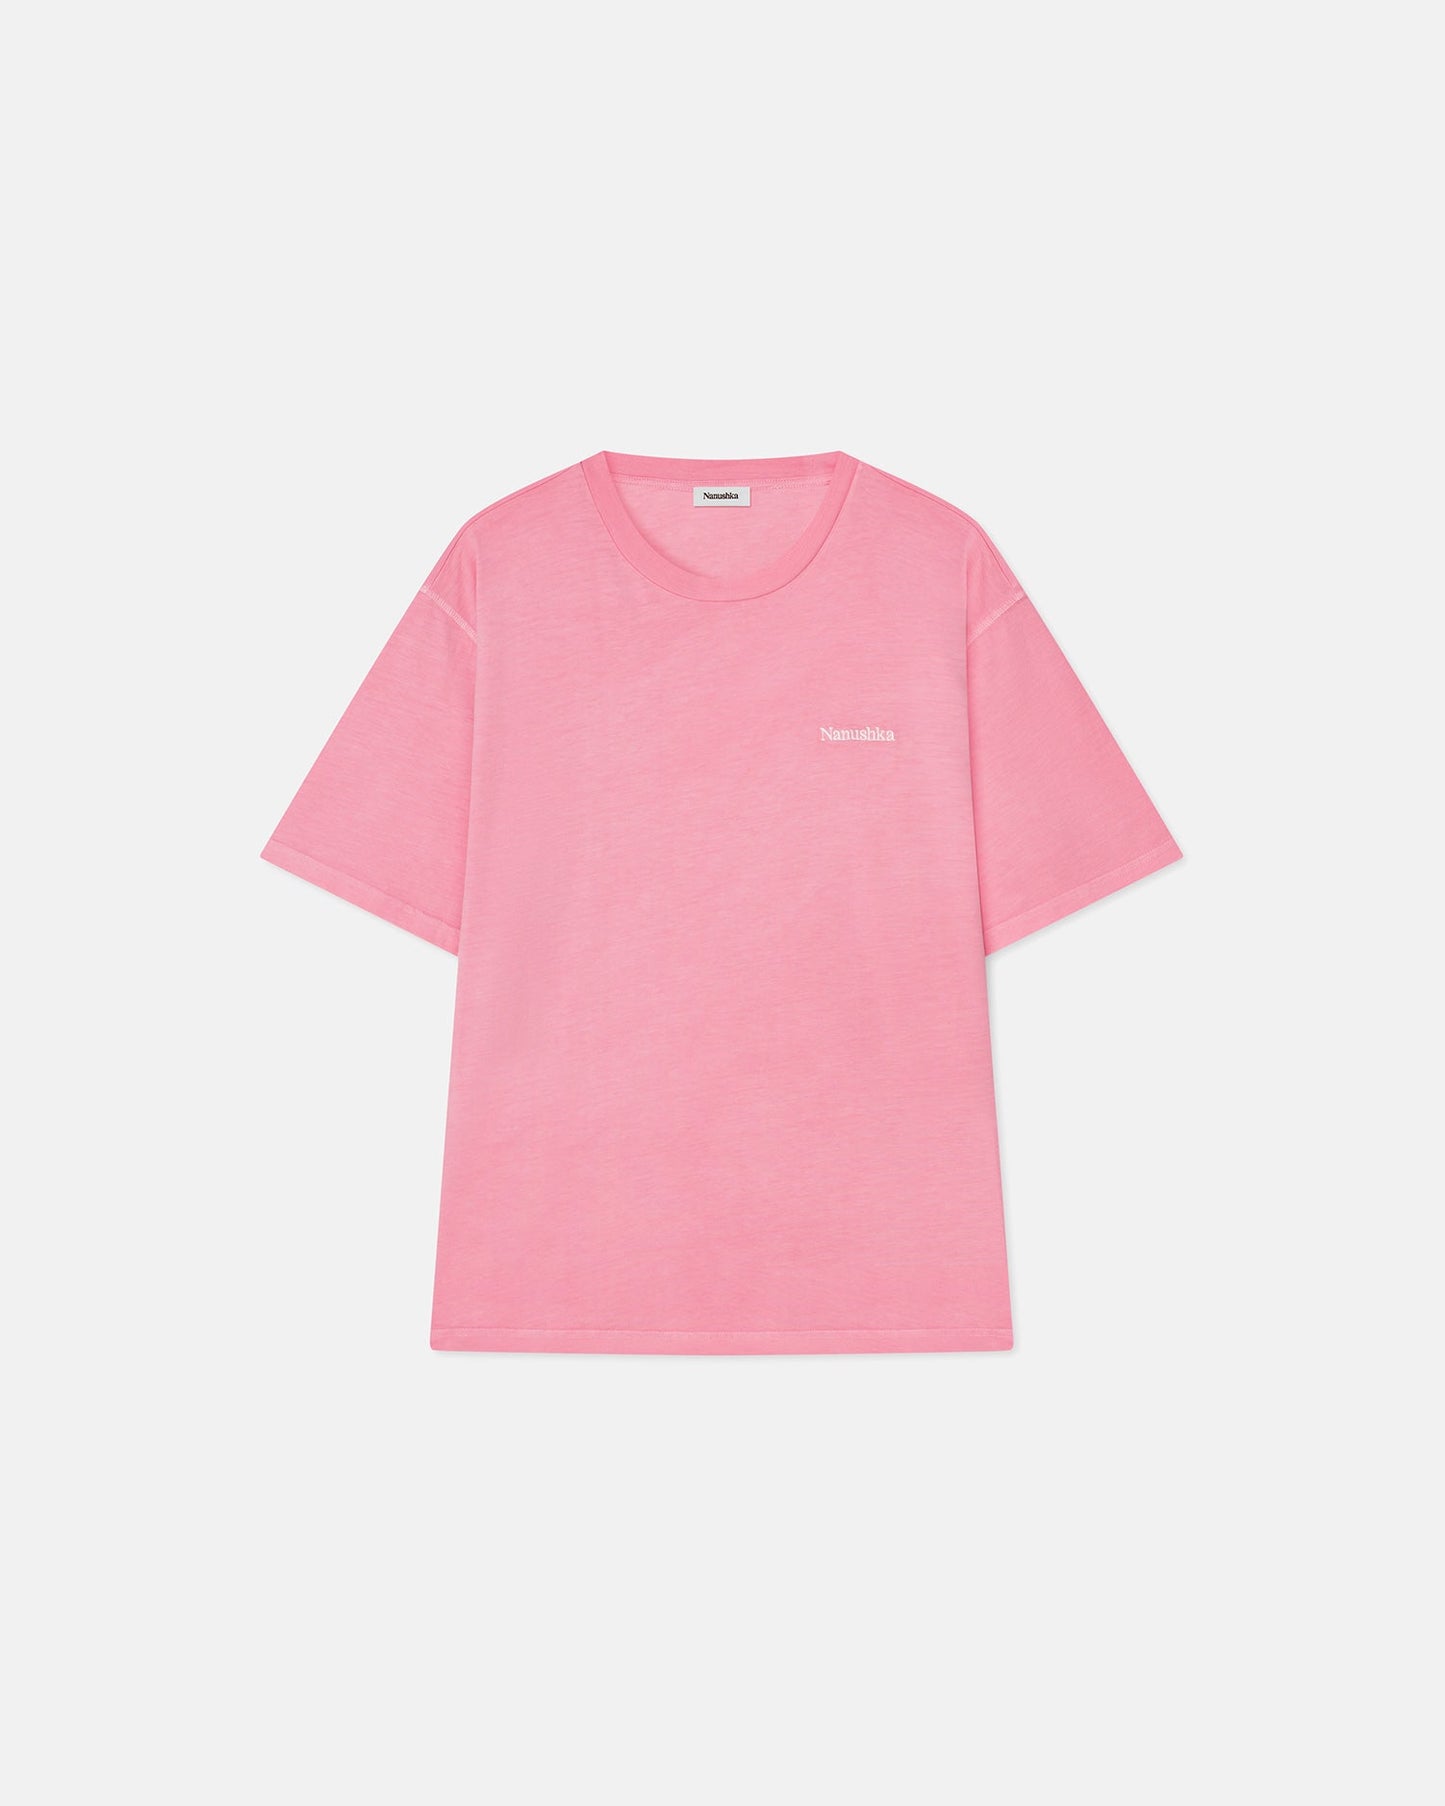 Reece - Archive Organically Grown Cotton T-Shirt - Washed Pink Pf23 ...